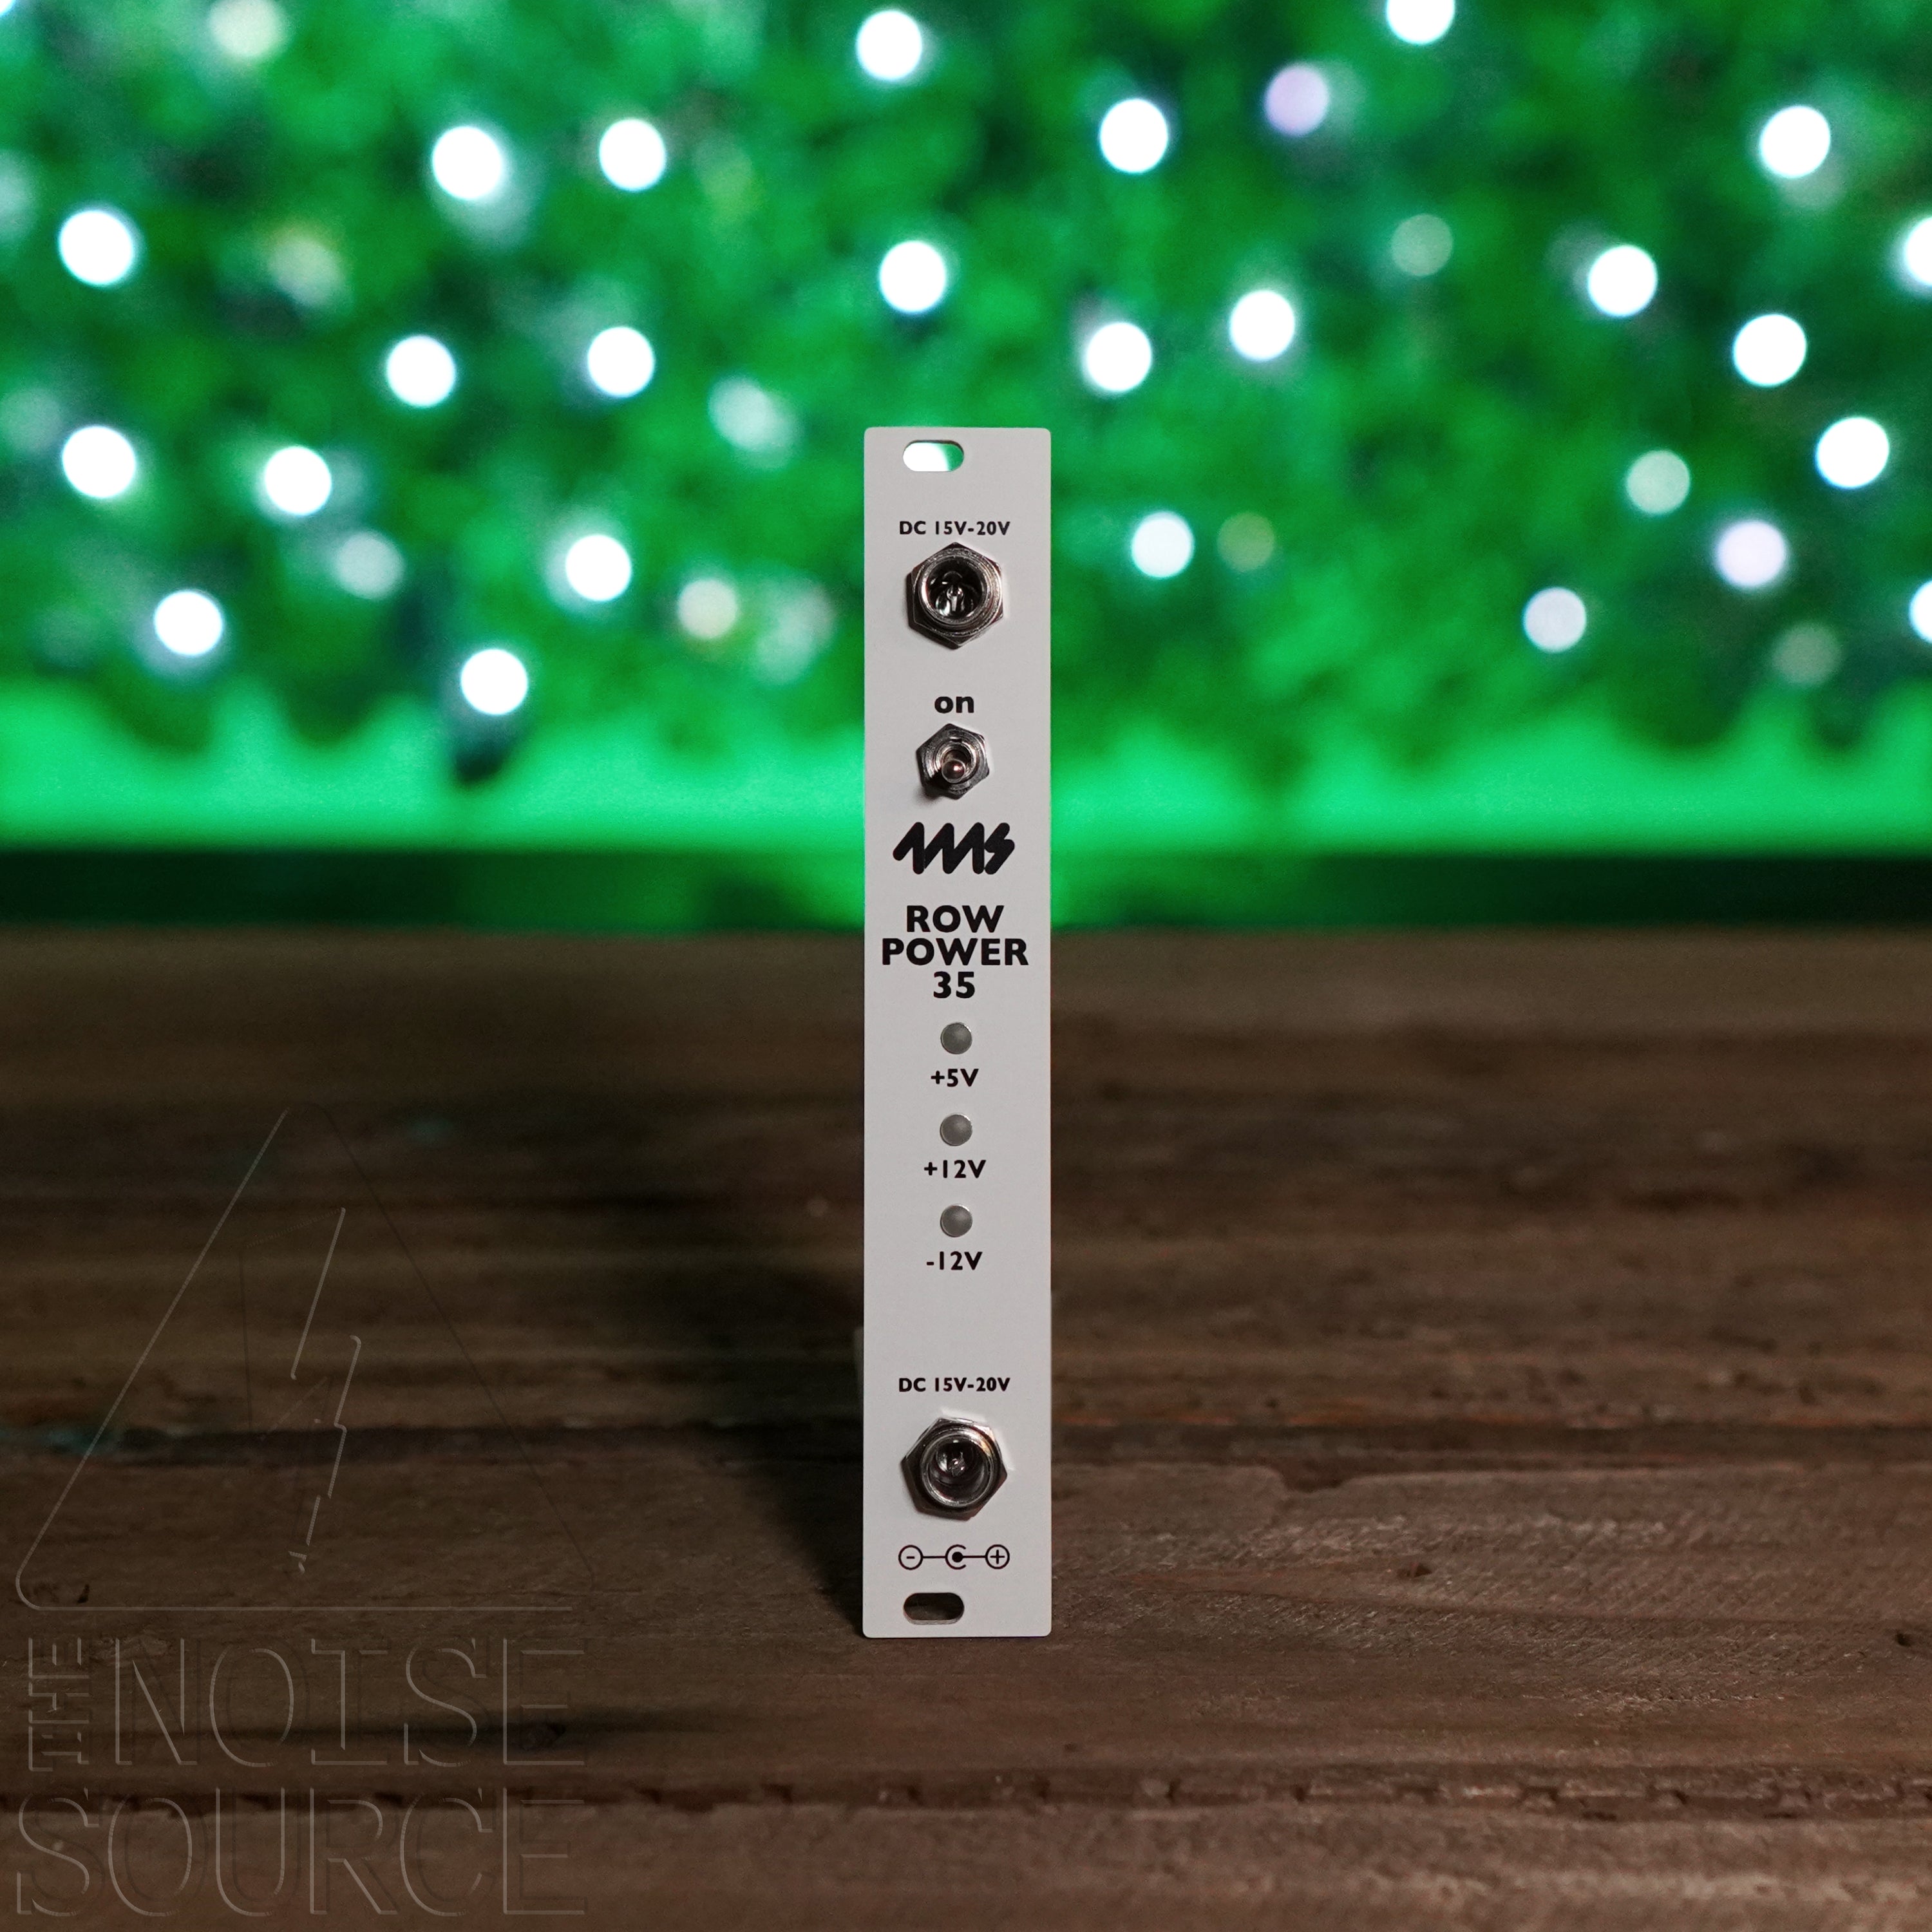 4ms Row Power 35 eurorack module front view